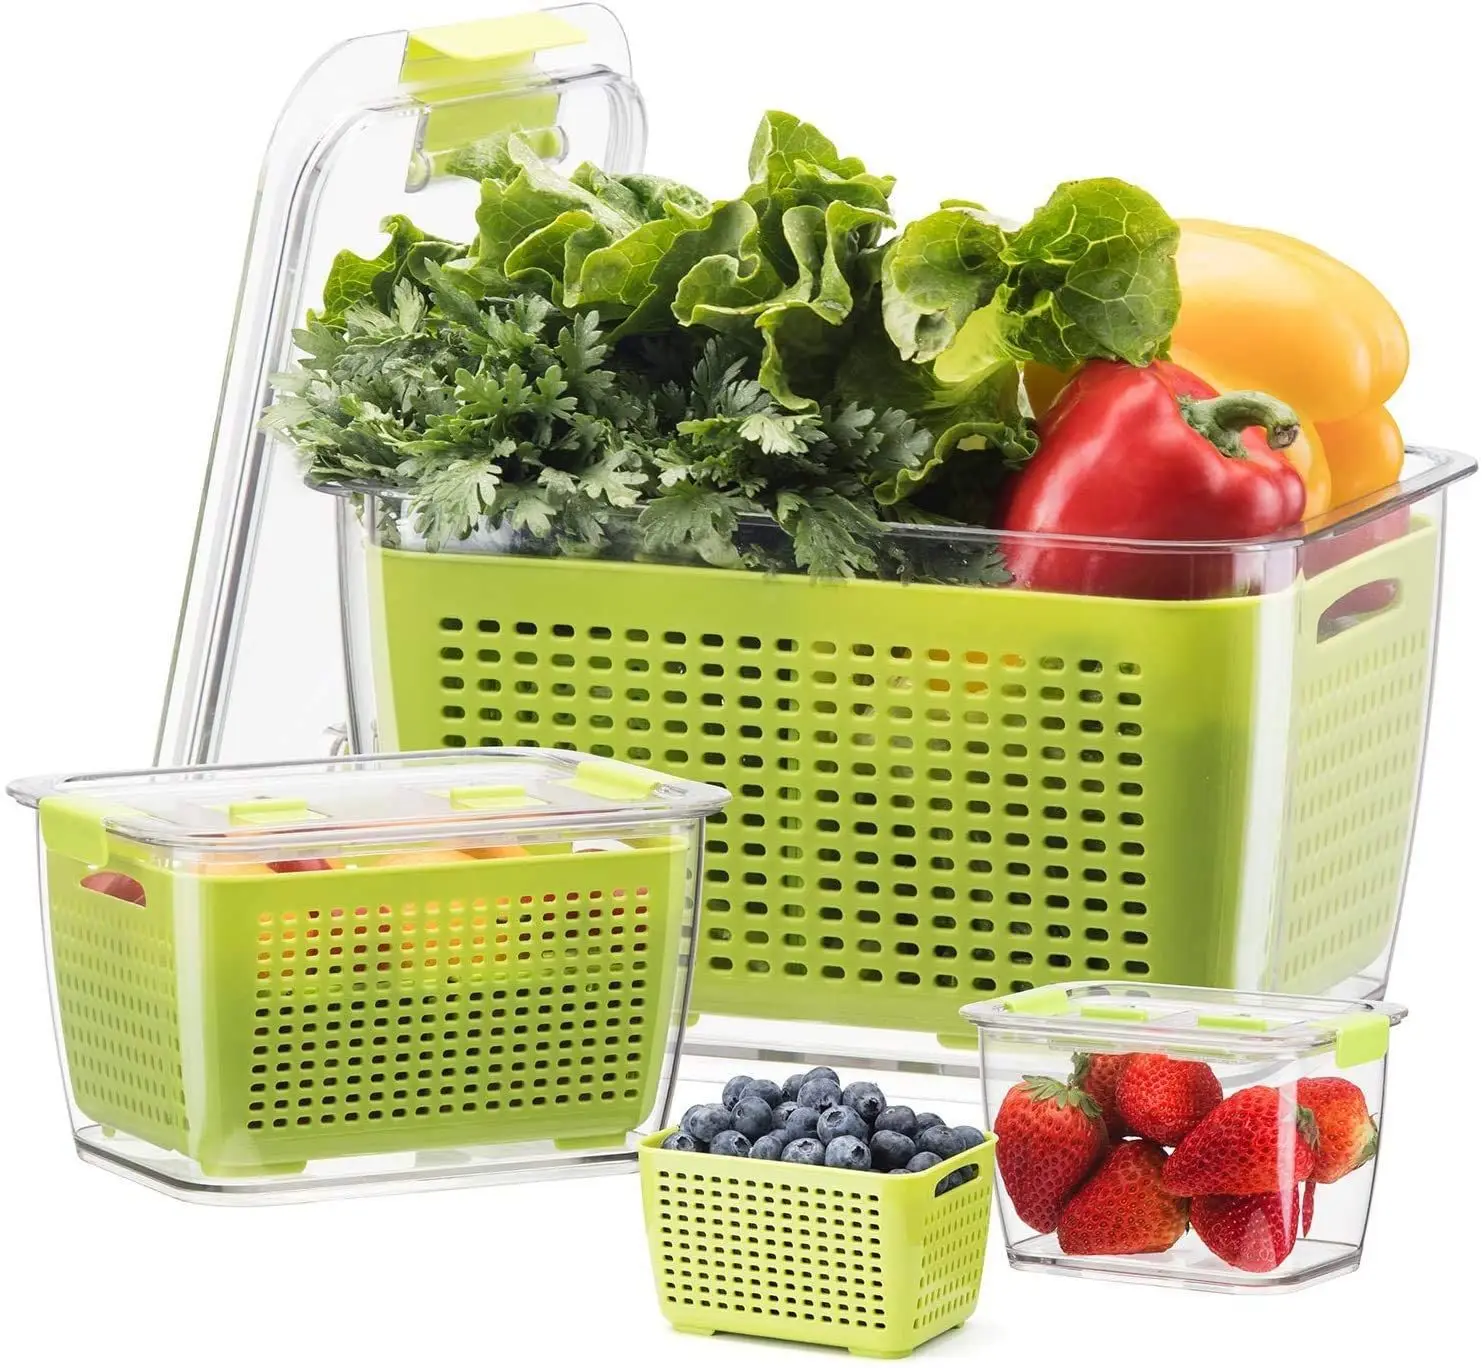 

Vegetable Fruit Fresh Airtight Lid Organizer Grid Drain Basket Clear Kitchen Fridge Refrigerator Food Storage Box Containers, As picture or customized